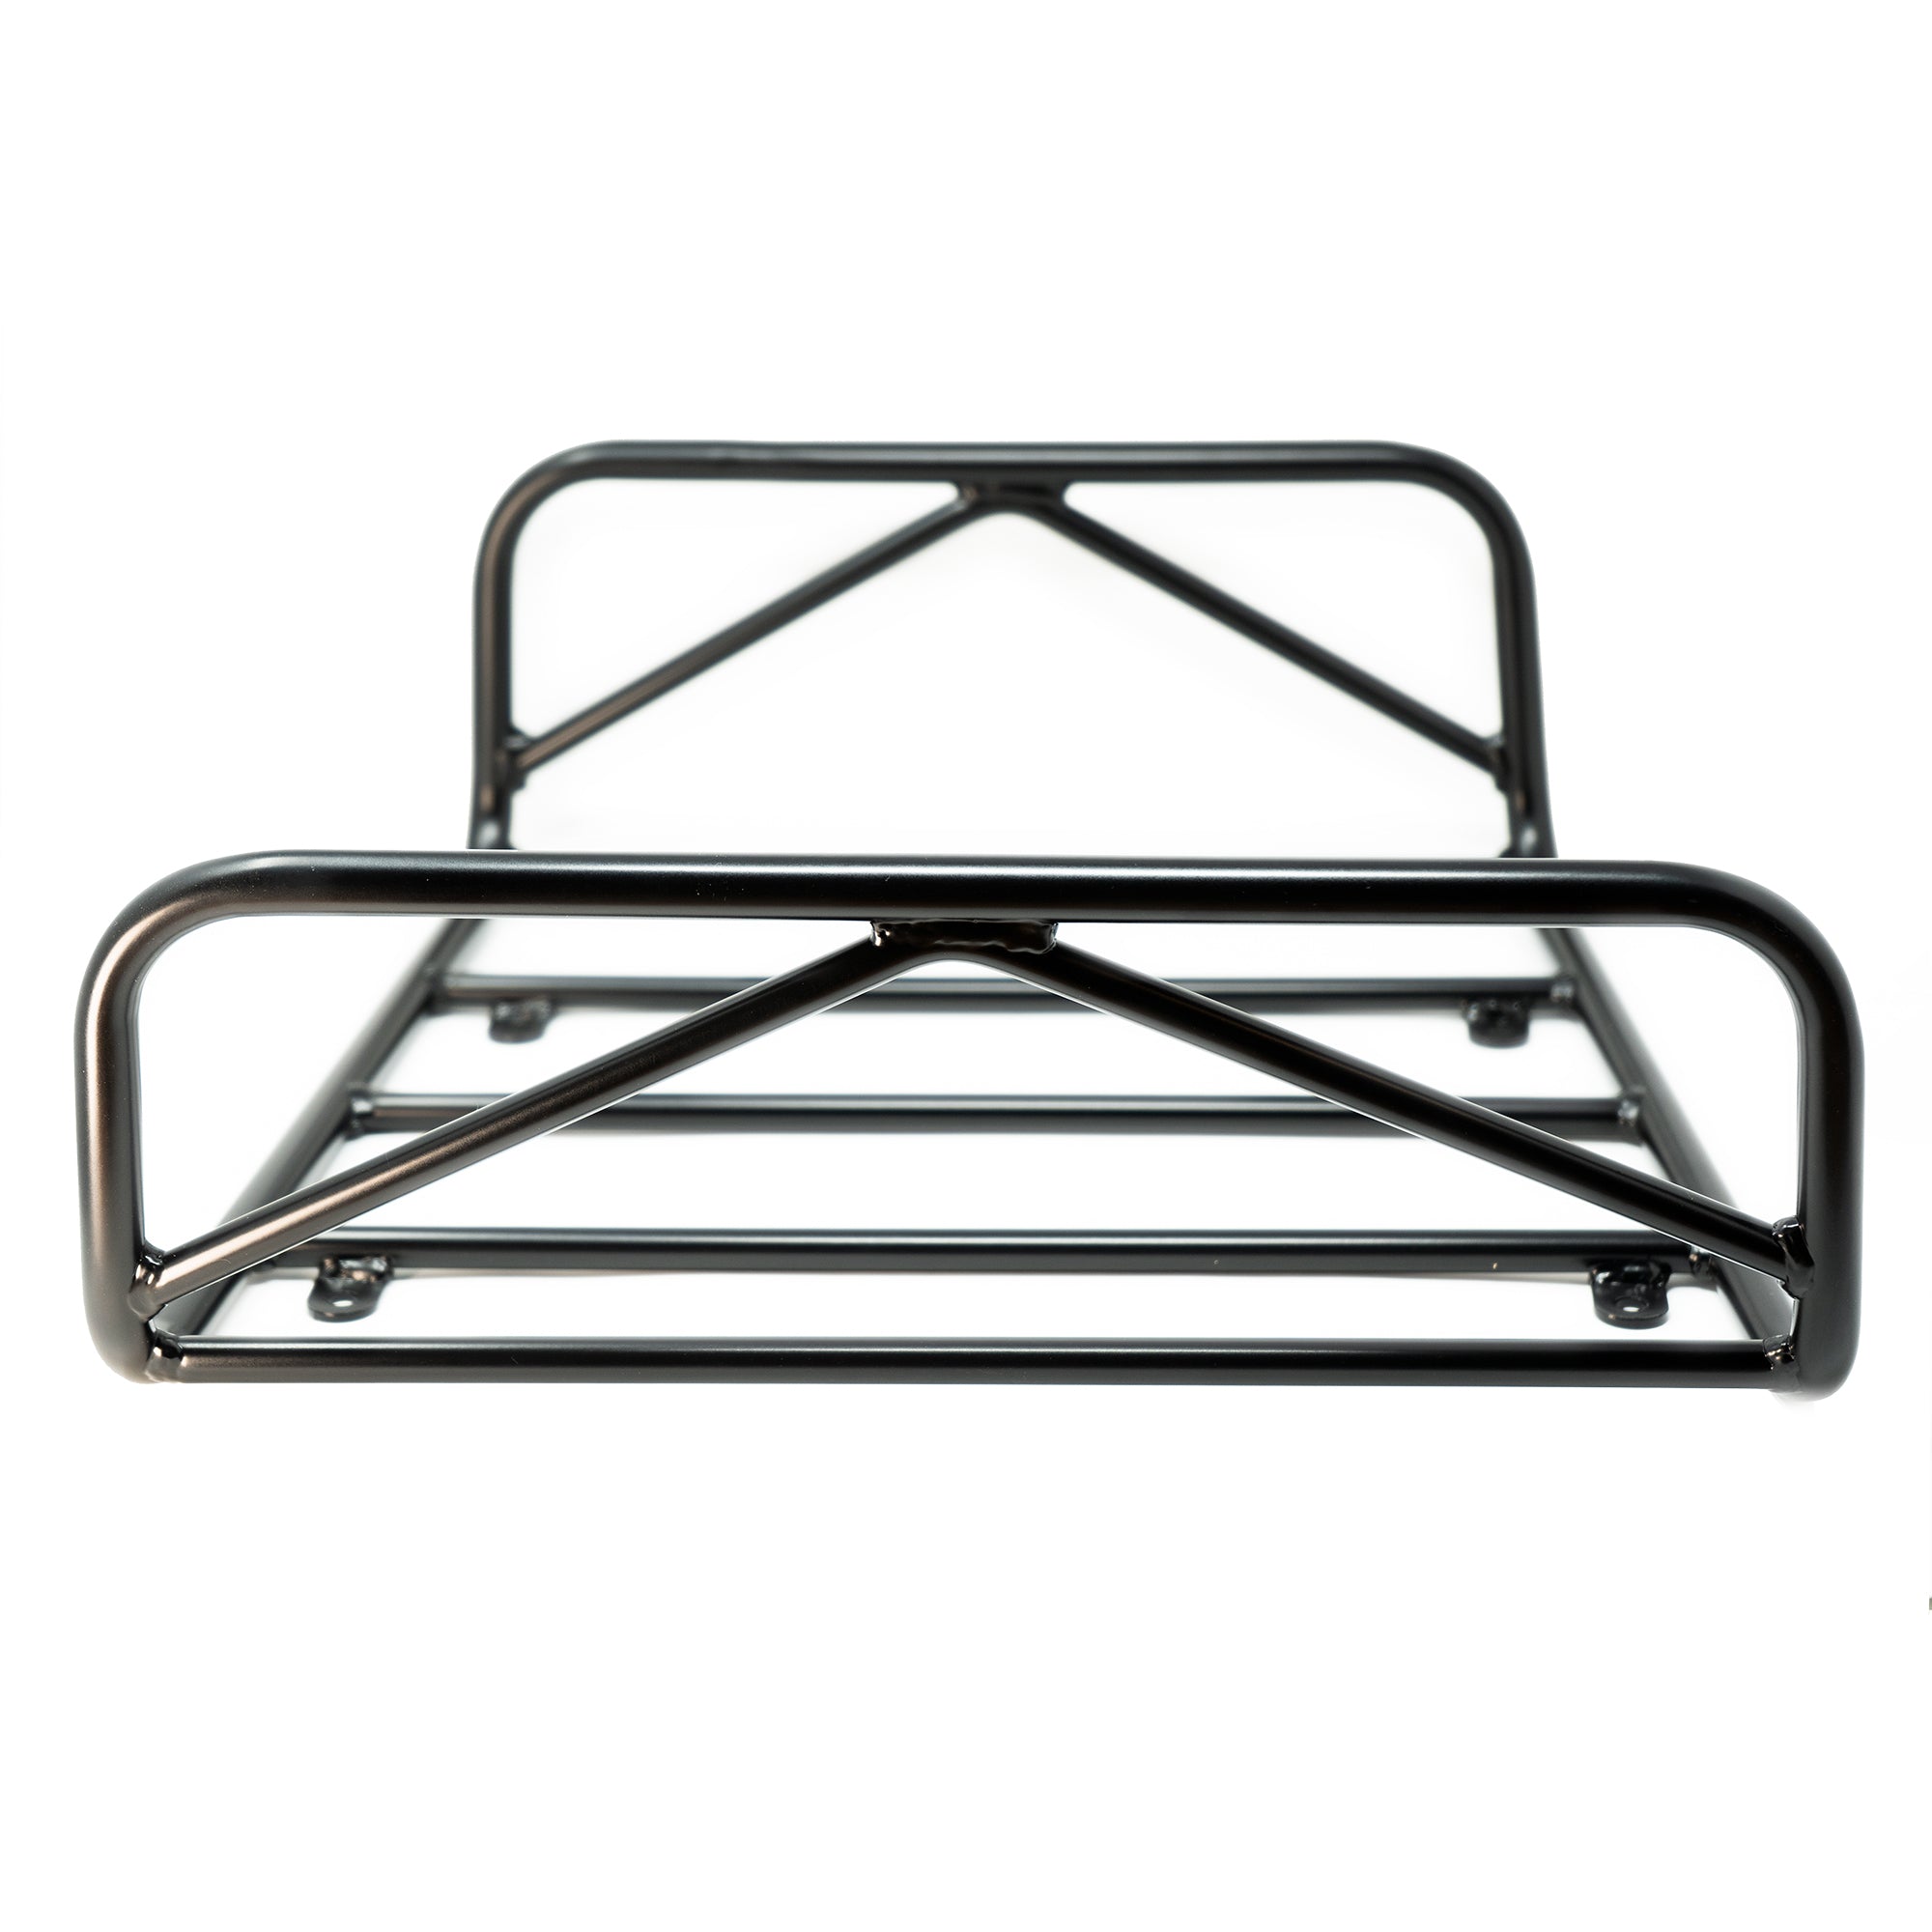 Luggage Rack for Sidecar Trunk Lid